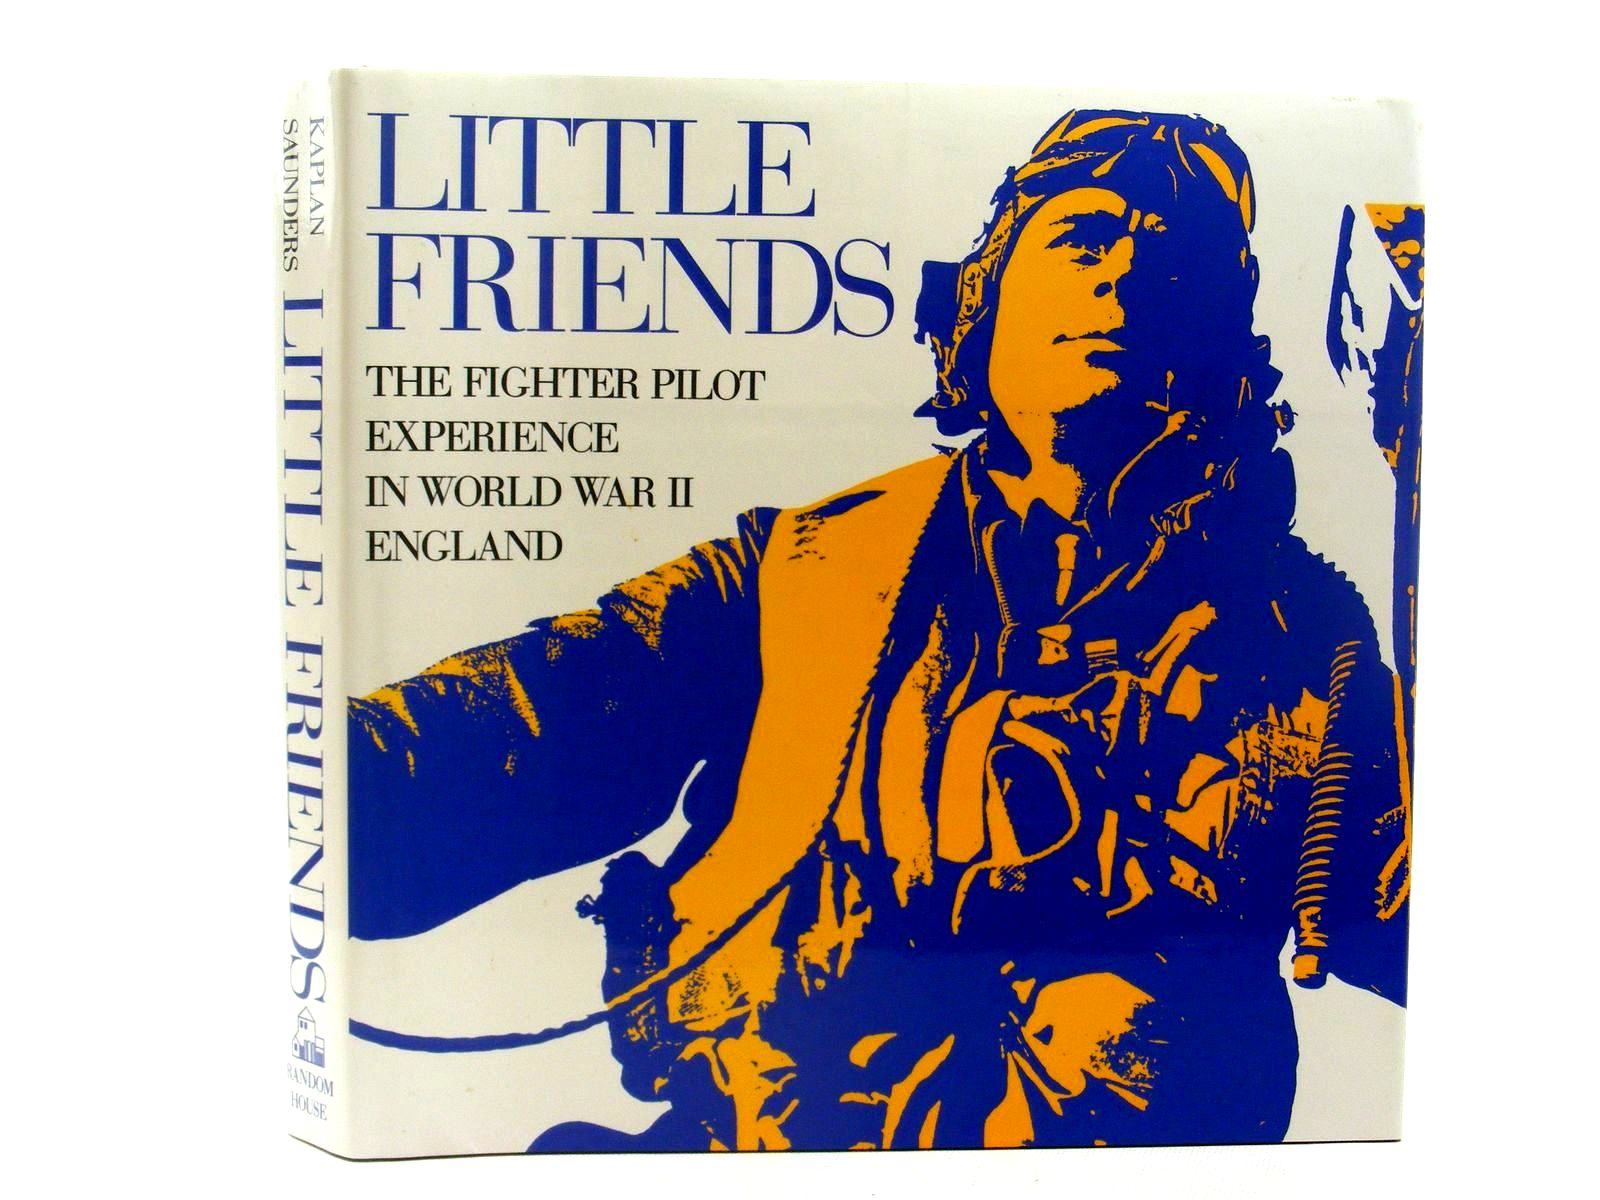 Photo of LITTLE FRIENDS written by Kaplan, Philip Saunders, Andy published by Random House (STOCK CODE: 1610281)  for sale by Stella & Rose's Books